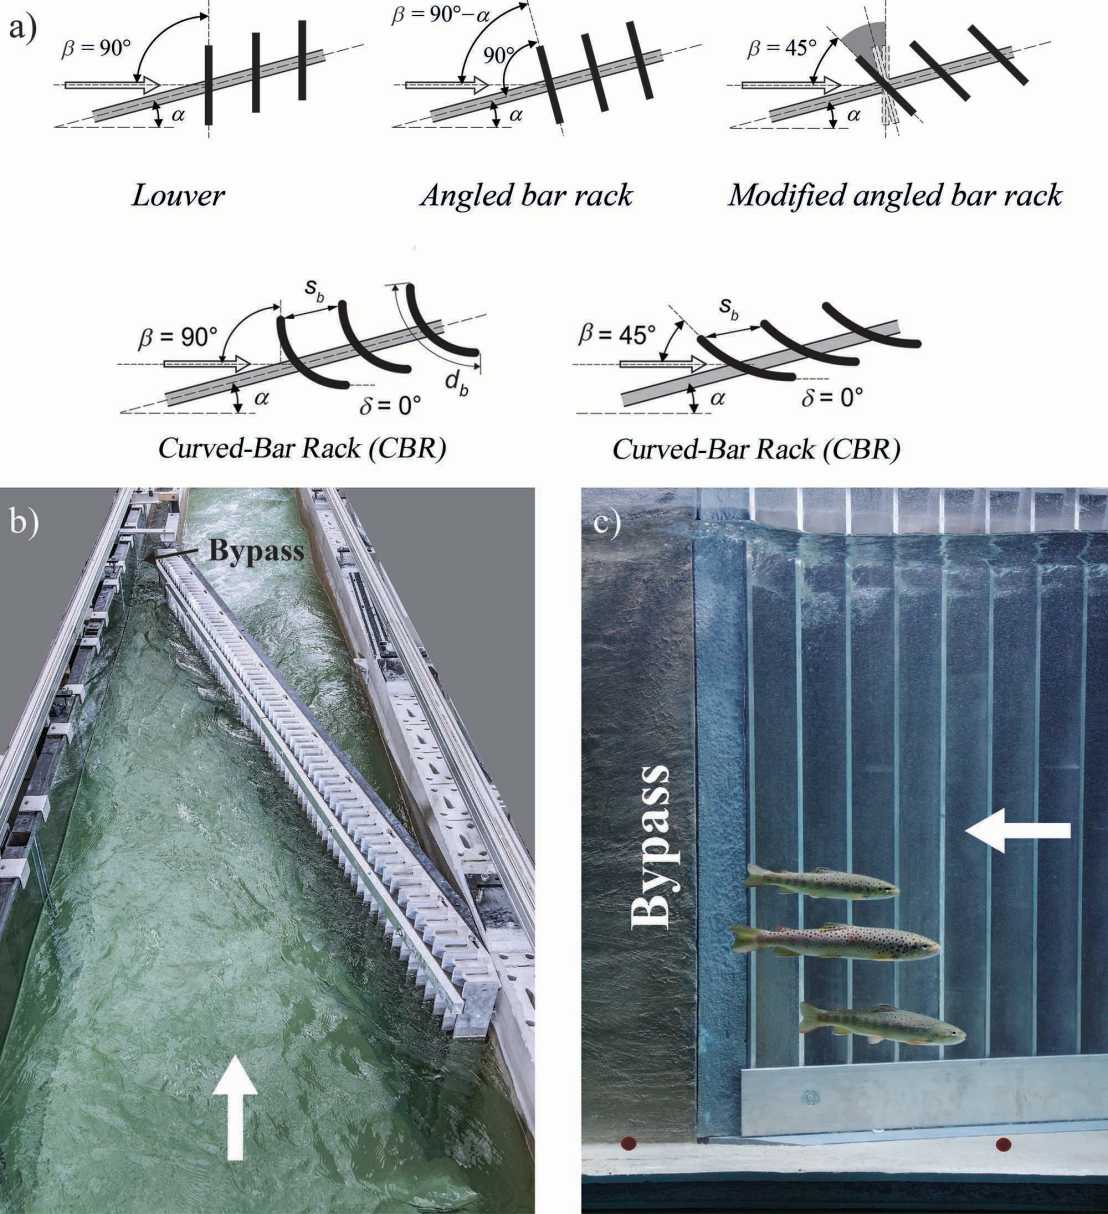 Enlarged view: Detailed view of louver, angled bar rack,  modified angled bar rack and newly designed curved-bar racks (a), ethohydraulic model with louver: (b) top view and (c) side view with trout (Photo: D. Flügel) (→flow direction)